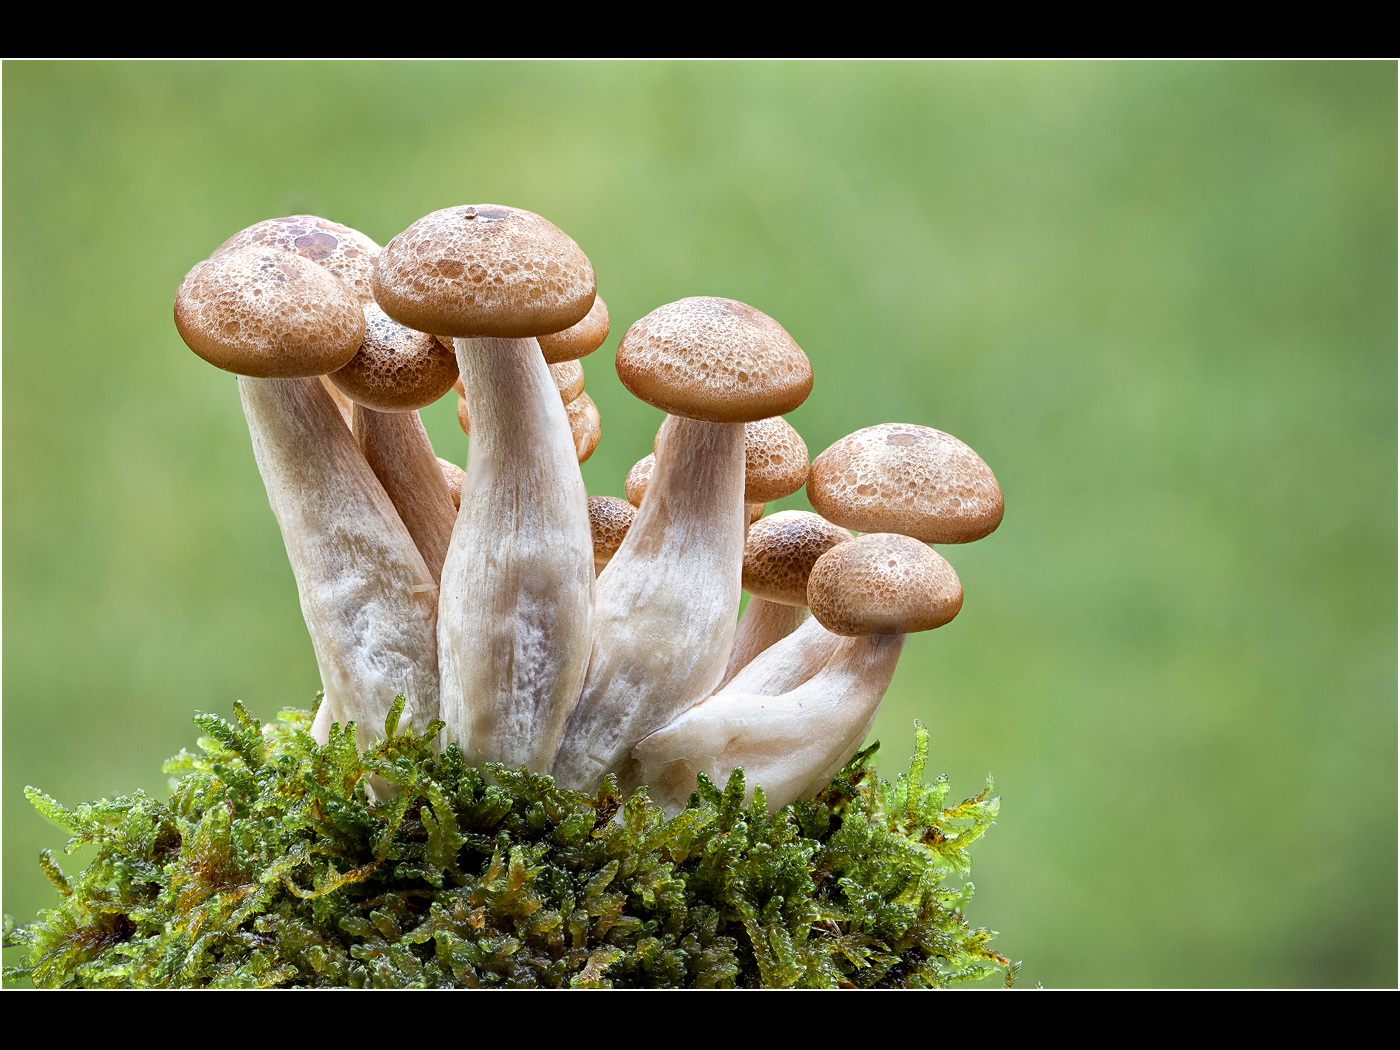 Cultivated Mushrooms on Moss Bed